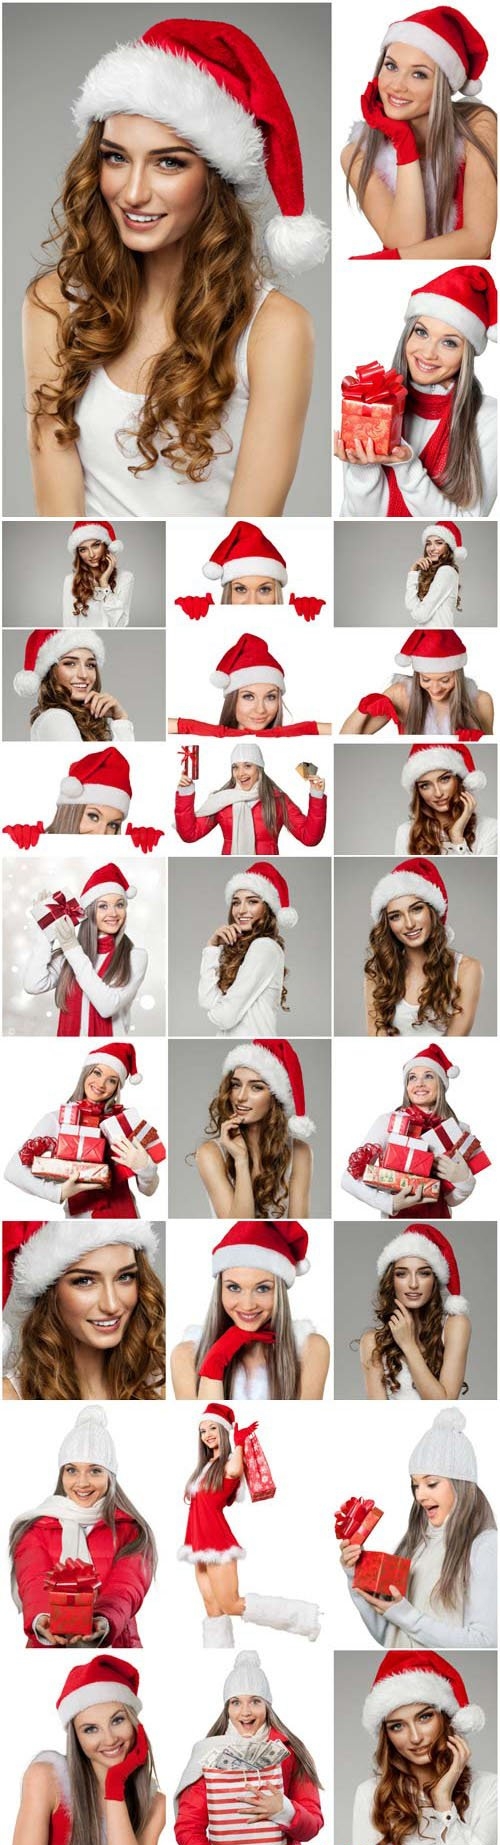 New Year and Christmas stock photos - 59